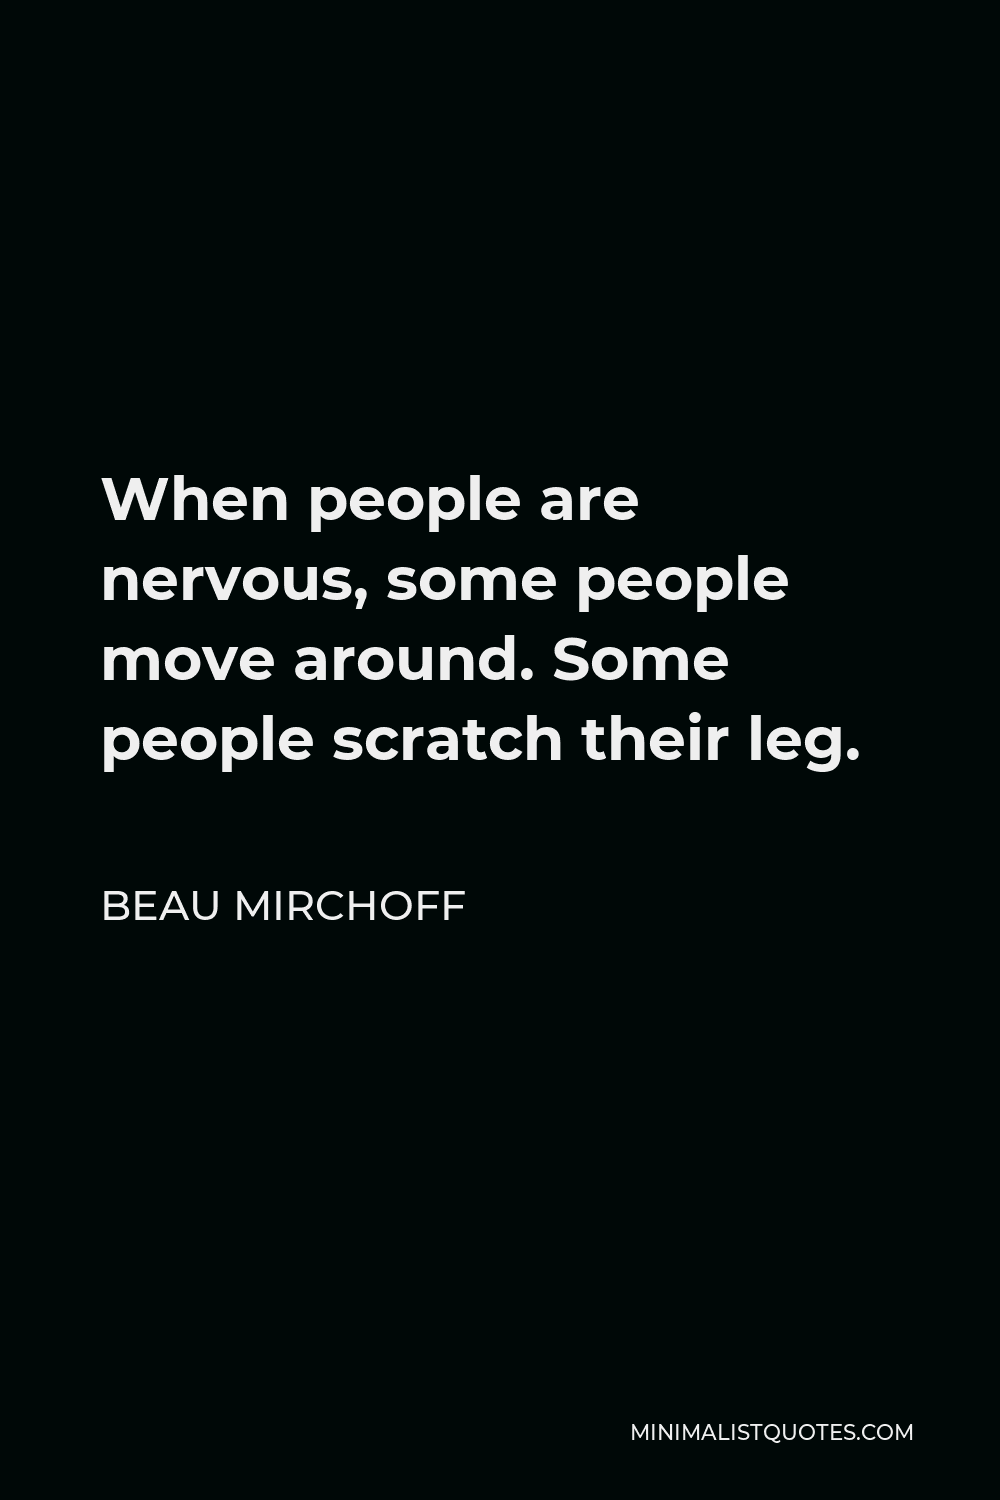 Beau Mirchoff Quote - When people are nervous, some people move around. Some people scratch their leg.